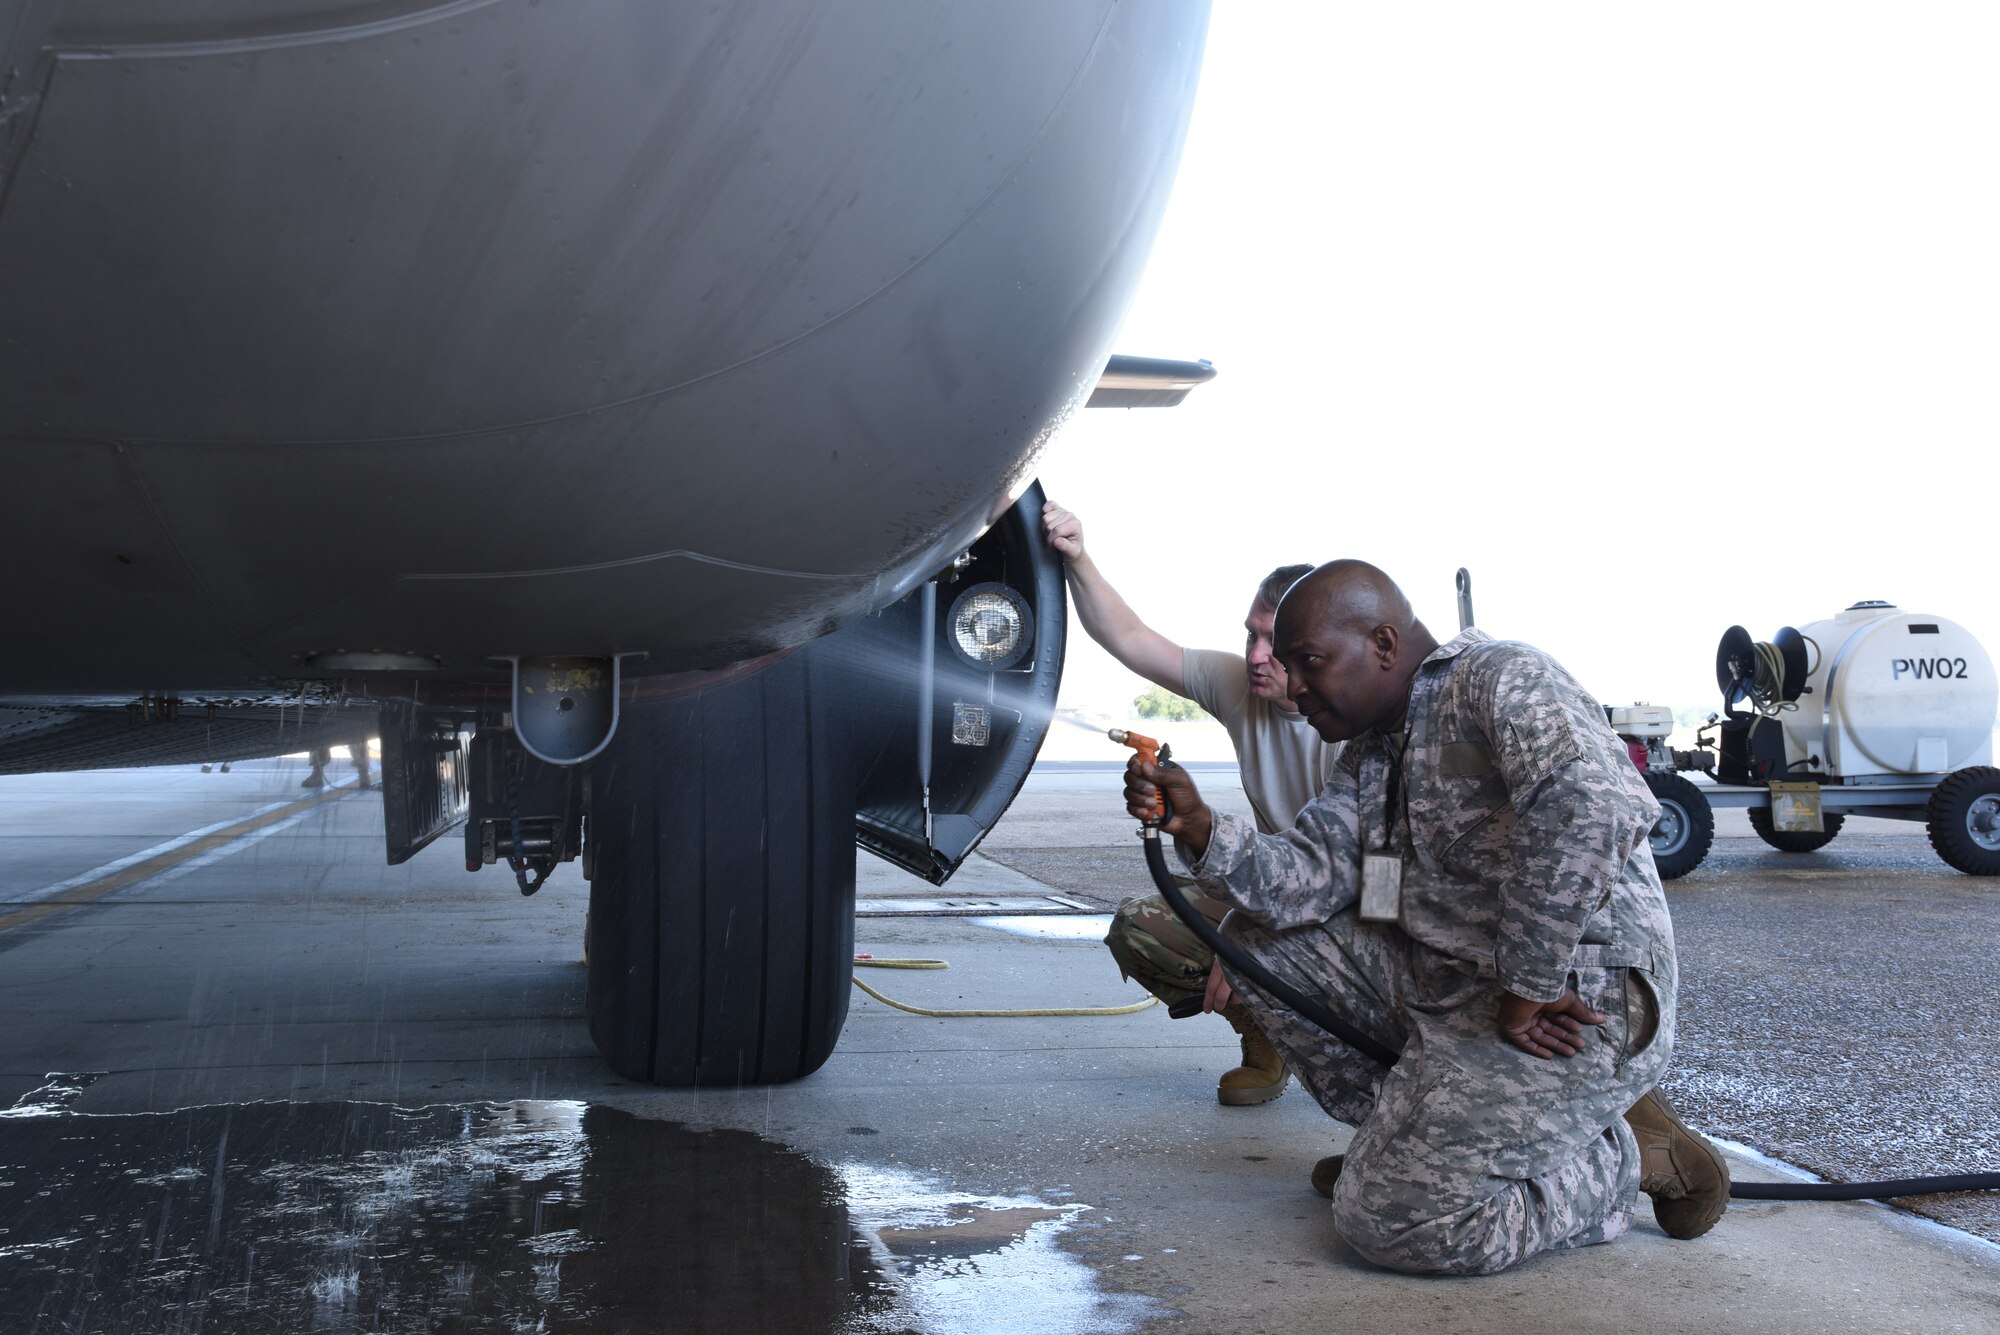 Members of the 403rd Maintenance Squadron complete an Engine Compressor Wash on an 815th Airlift Squadron C-130J Super Hercules before the aircraft goes for inspection in the Isochronal Dock for a "C" letter inspection at Keesler Air Force Base, Mississippi May 11, 2020. These inspections or letter checks can range from "A" five days basic check, "B" 18 days and more in depth, to "C" 22 days which is the most intrusive inspection; but are necessary to keep the aircraft maintained. (U.S. Air Force photo by Jessica L. Kendziorek)